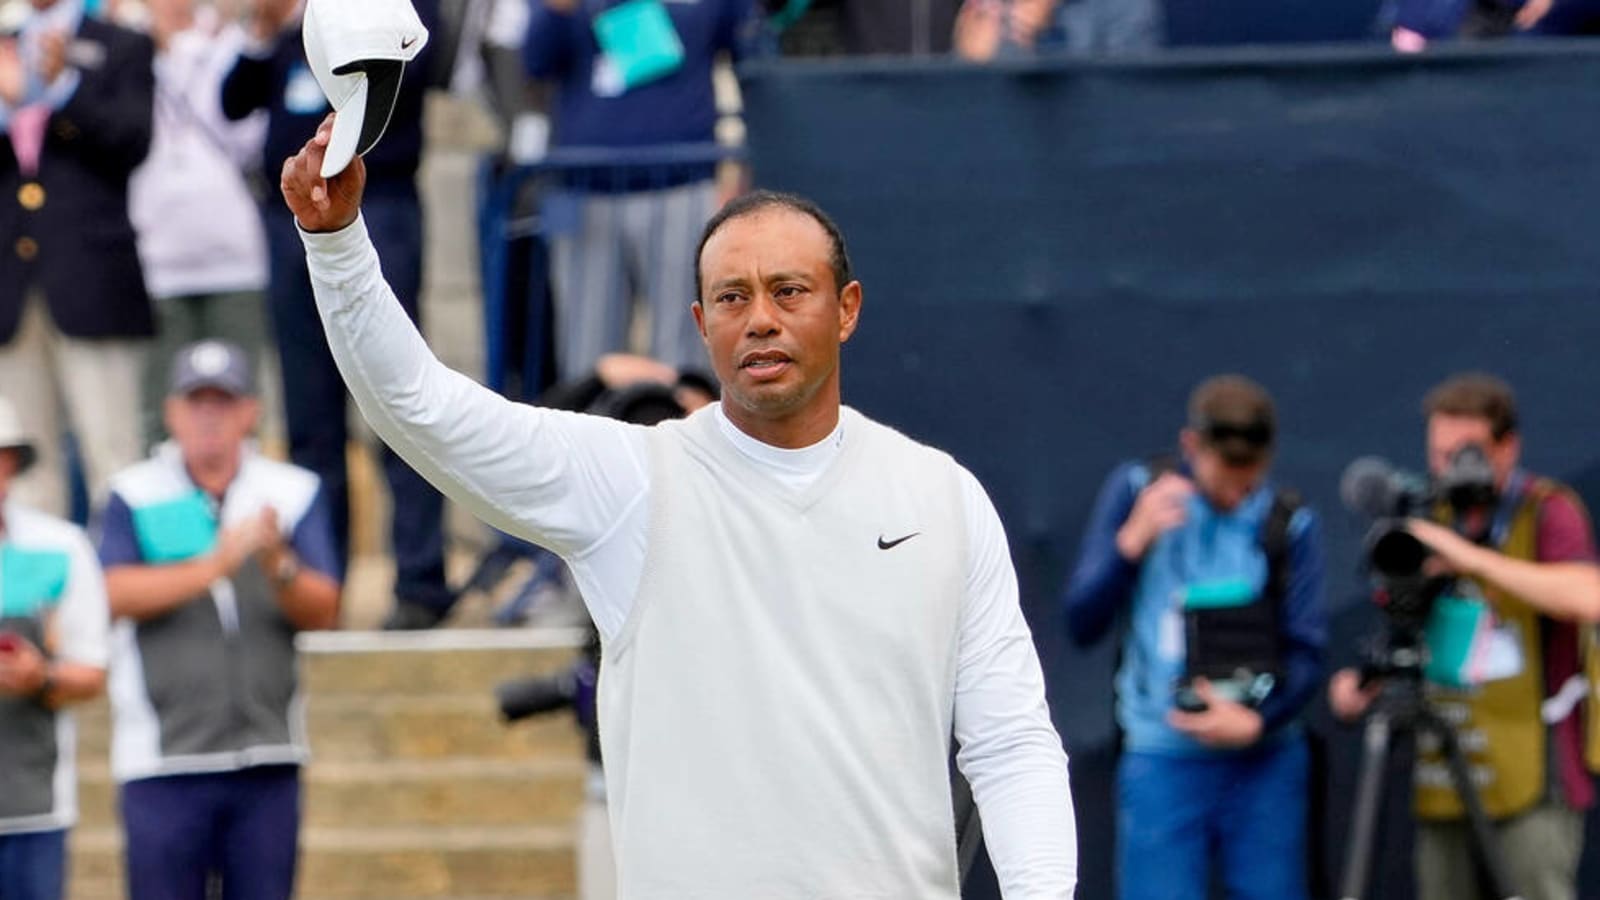 Tiger receives rousing ovation at The Open's 18th green